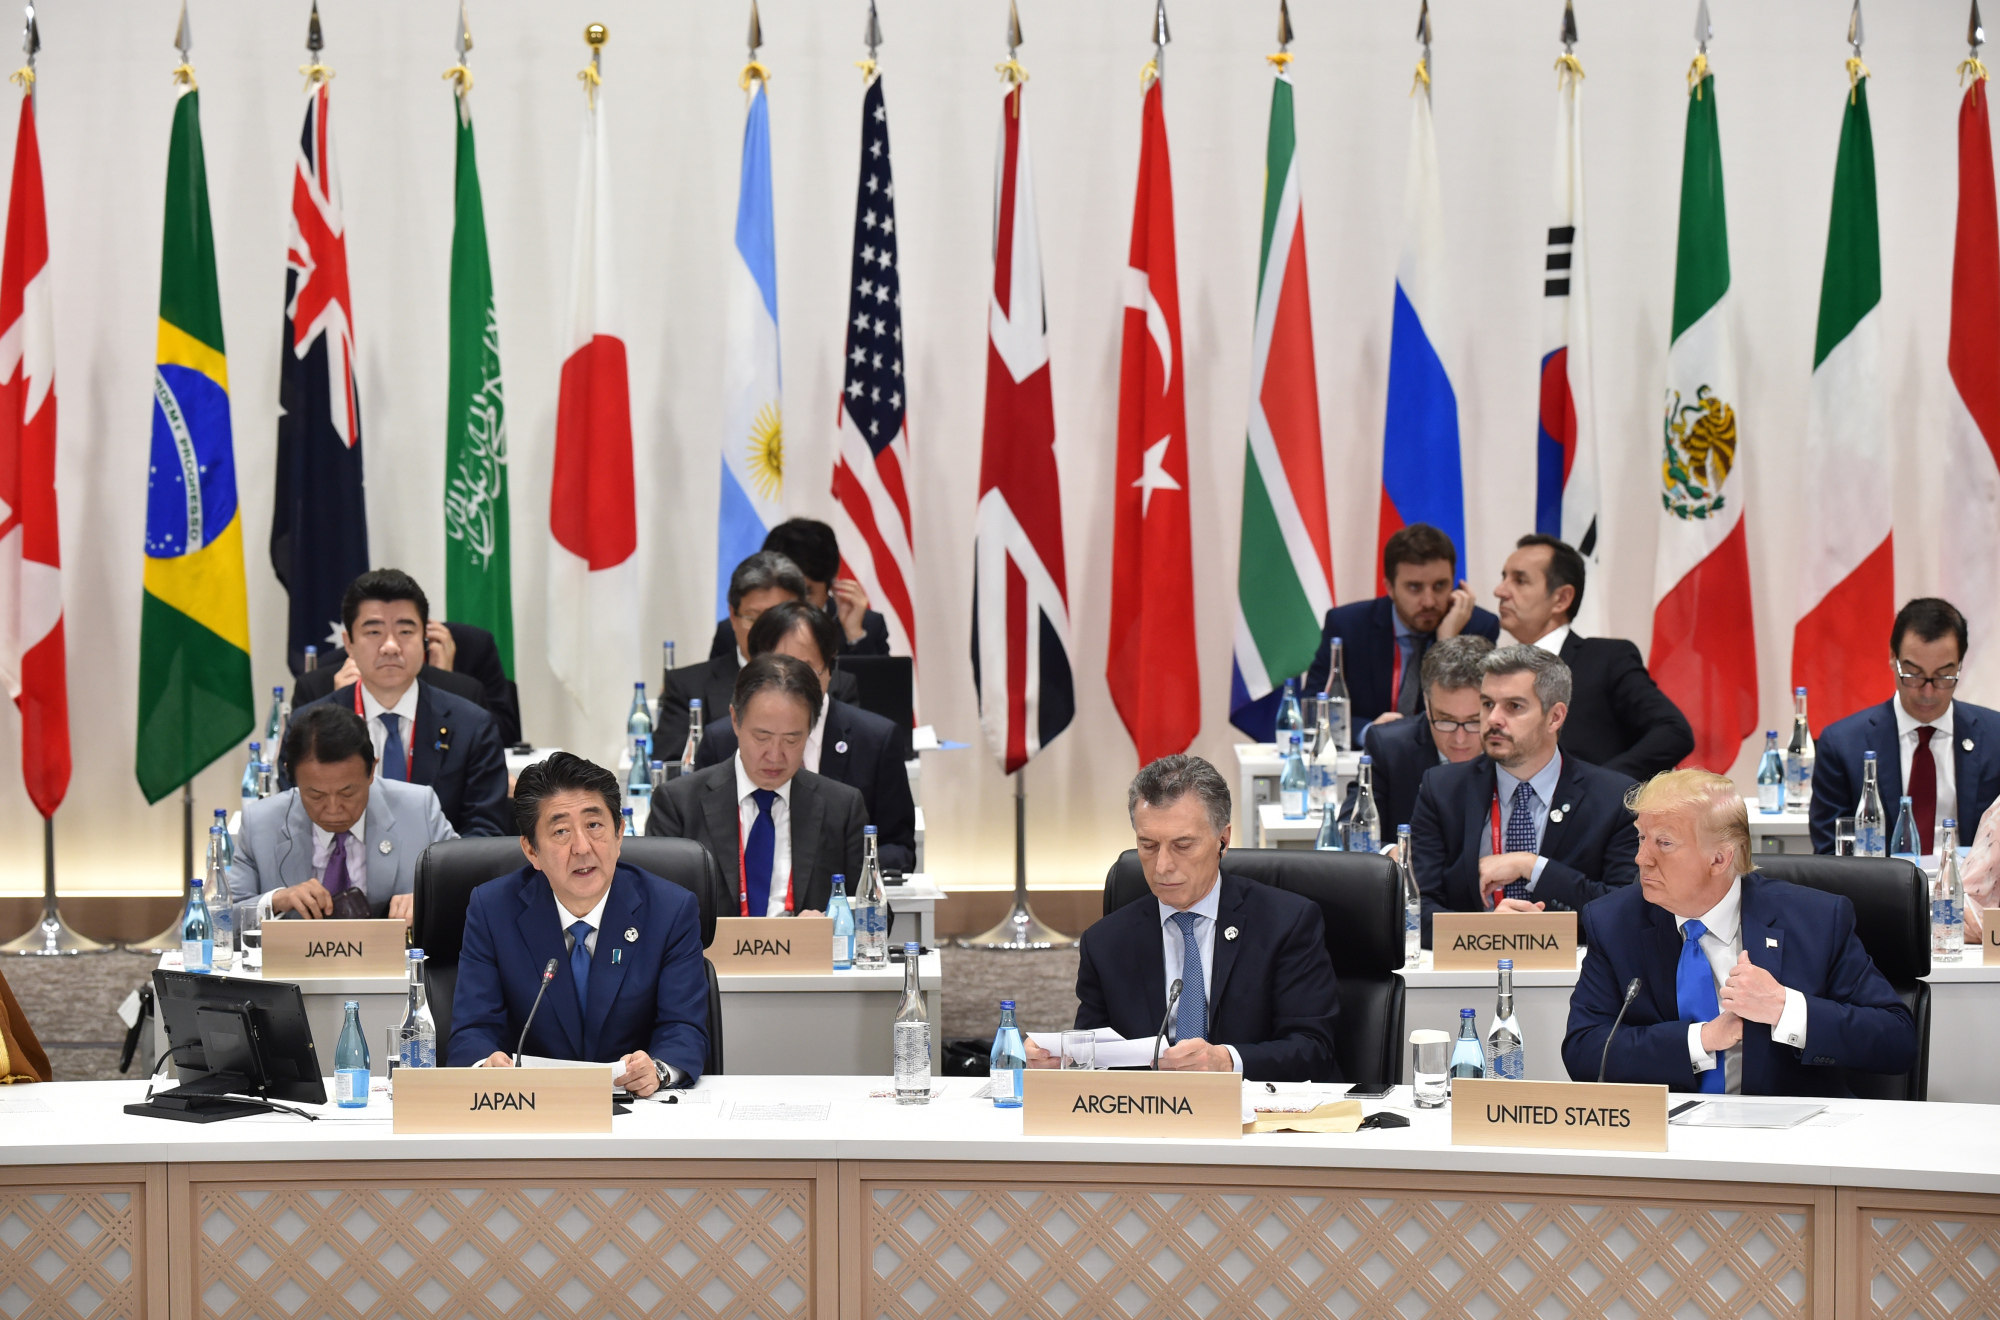 Shinzo Abe, Japan's prime minister, front row left, speaks as Mauricio Macri, Argentina's president, front row center, and U.S. President Donald Trump, front row right, attend a session at the Group of 20 (G-20) summit in Osaka, Japan, on Saturday, June 29, 2019. Disputes over wording on climate change and trade are unresolved shortly before Group of 20 leaders are due to release a communique from their summit in Japan, raising the risk of a very watered-down document or no statement at all. Photographer: Kazuhiro Nogi/Pool via Bloomberg